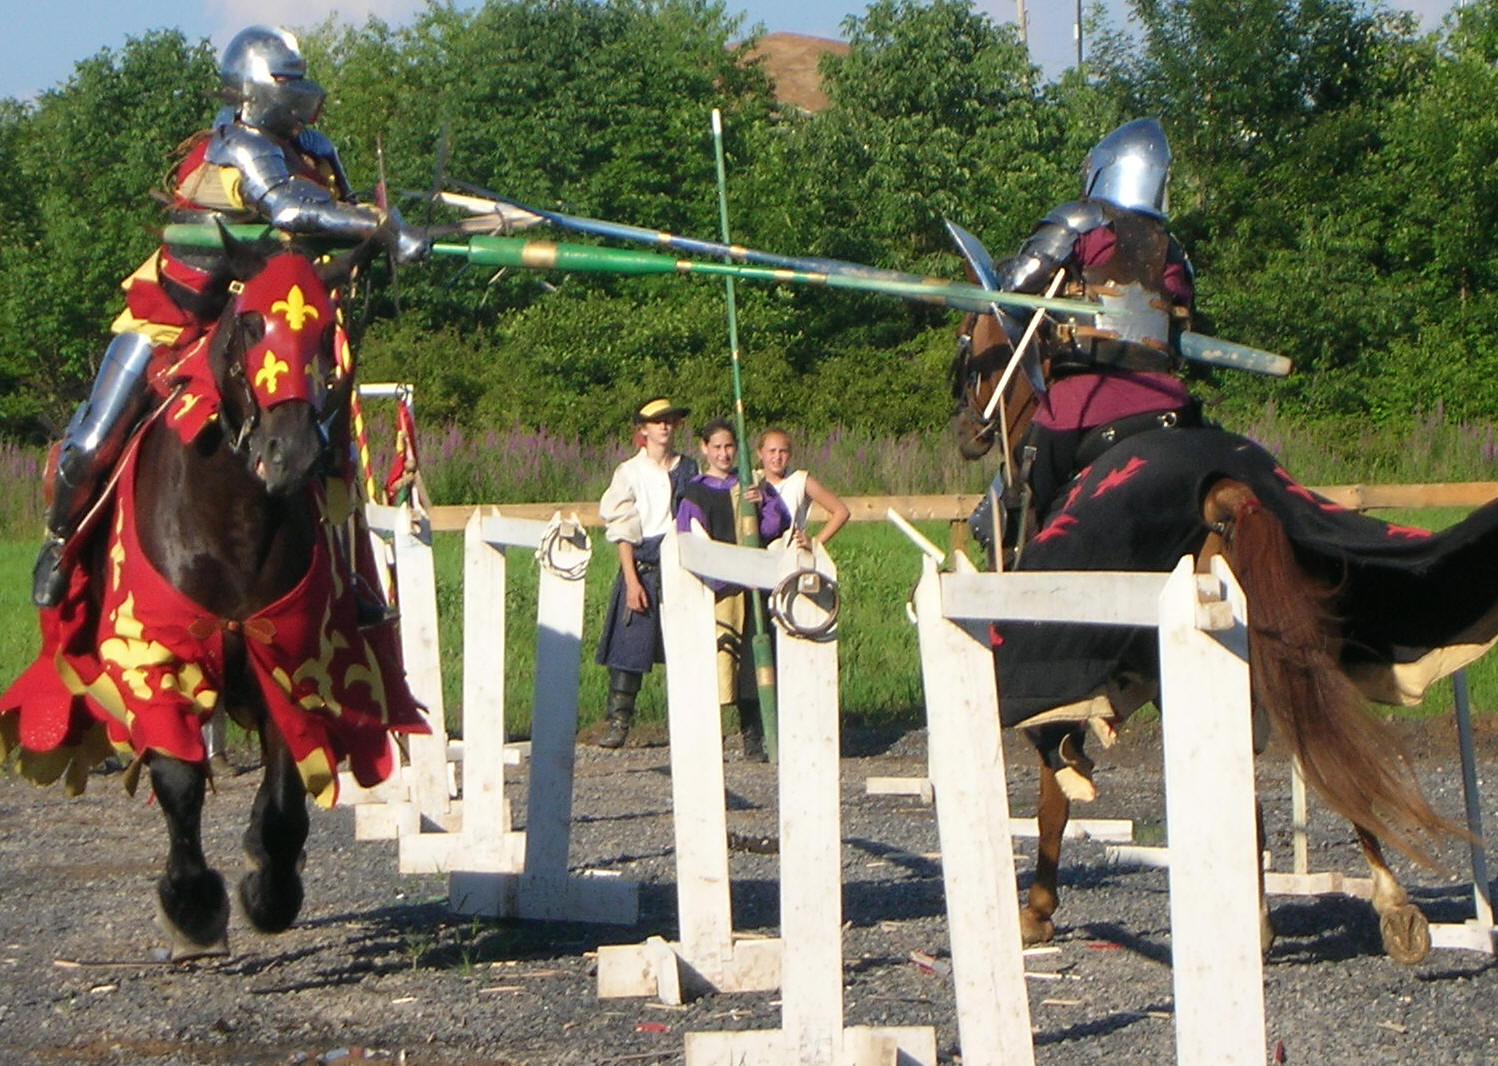 Enjoy an affordable, fun event for all ages at the Village Library Renaissance Faire in Wrightstown. See aerialists, jousters, firebreathers, working artisans and demonstrators, dancers, singers, musicians and free children's activities.